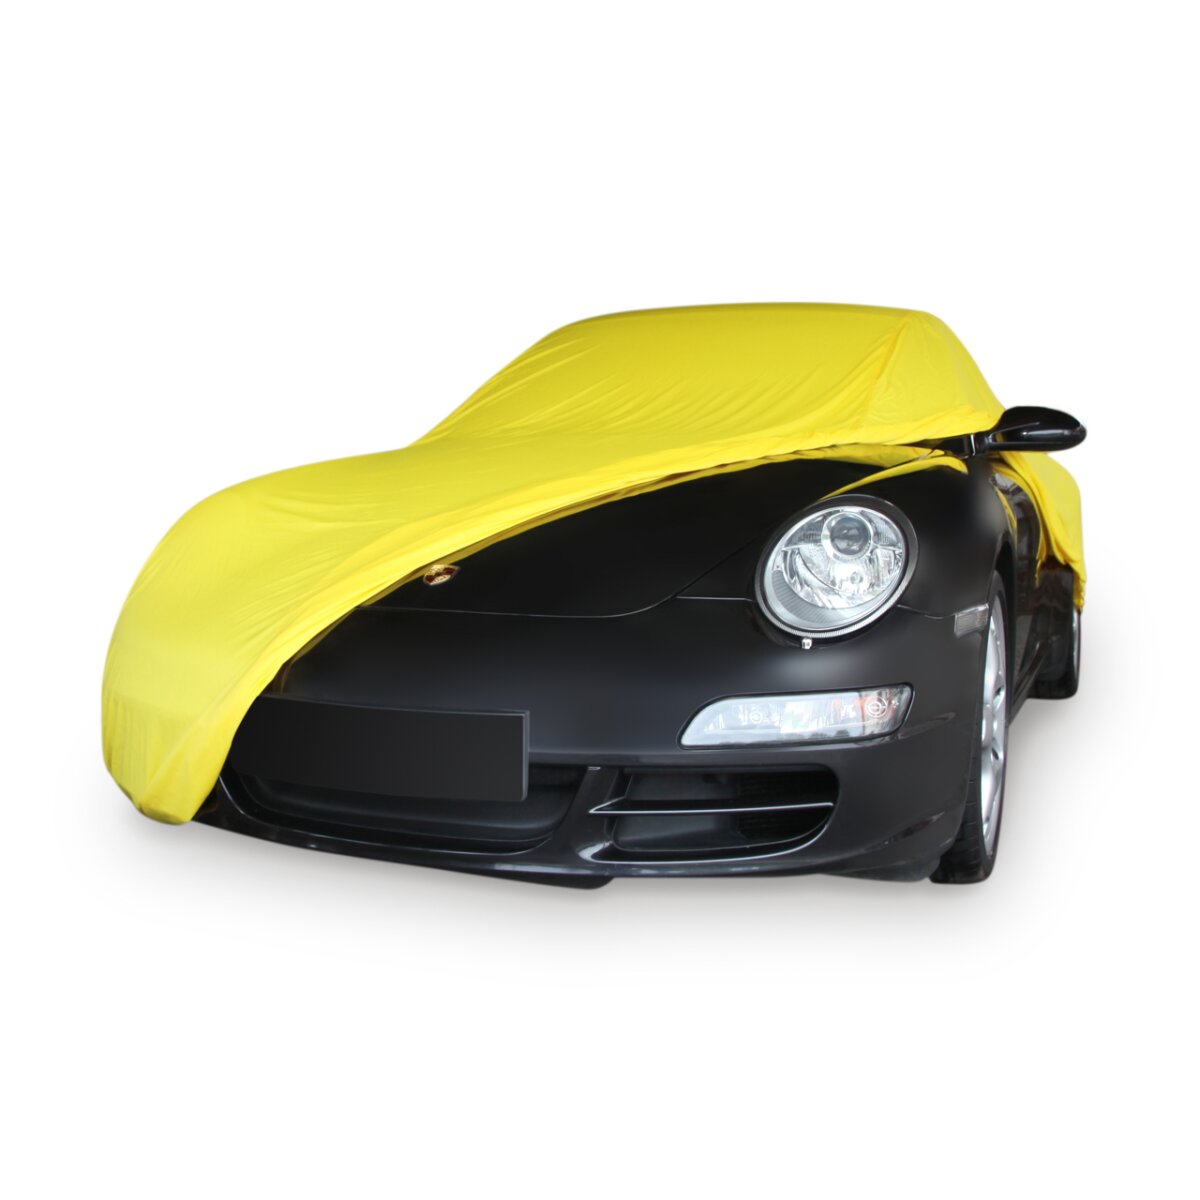 https://www.autoabdeckung.com/media/image/product/12157/lg/autoabdeckung-soft-indoor-car-cover-fuer-audi-tt-rs-coupe-8s-fv_3.jpg